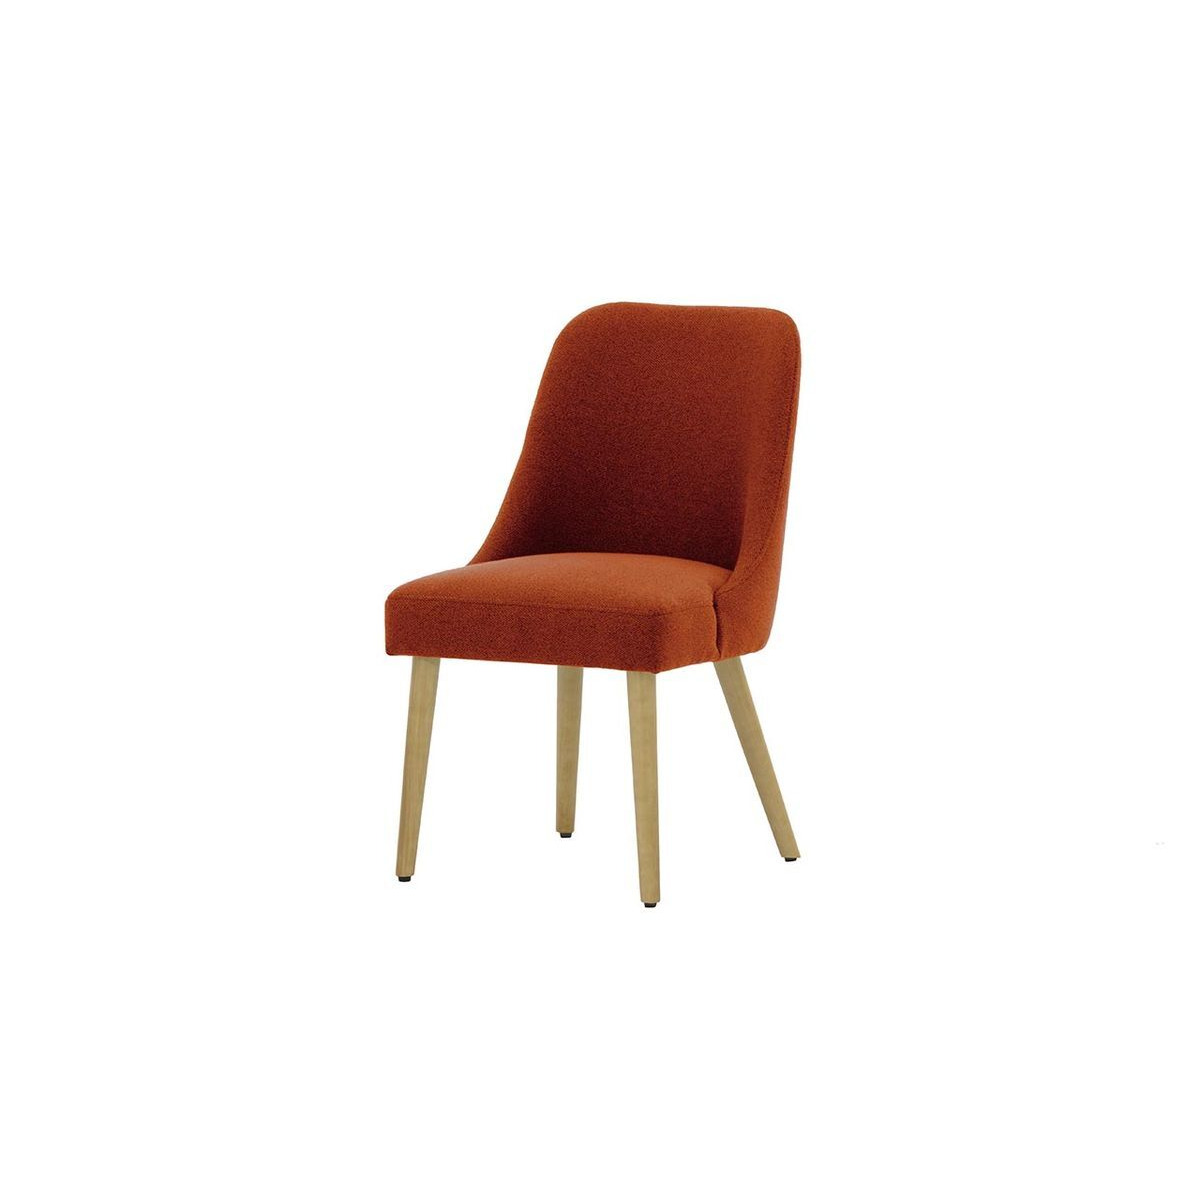 Albion Dining Chair, red, Leg colour: like oak - image 1